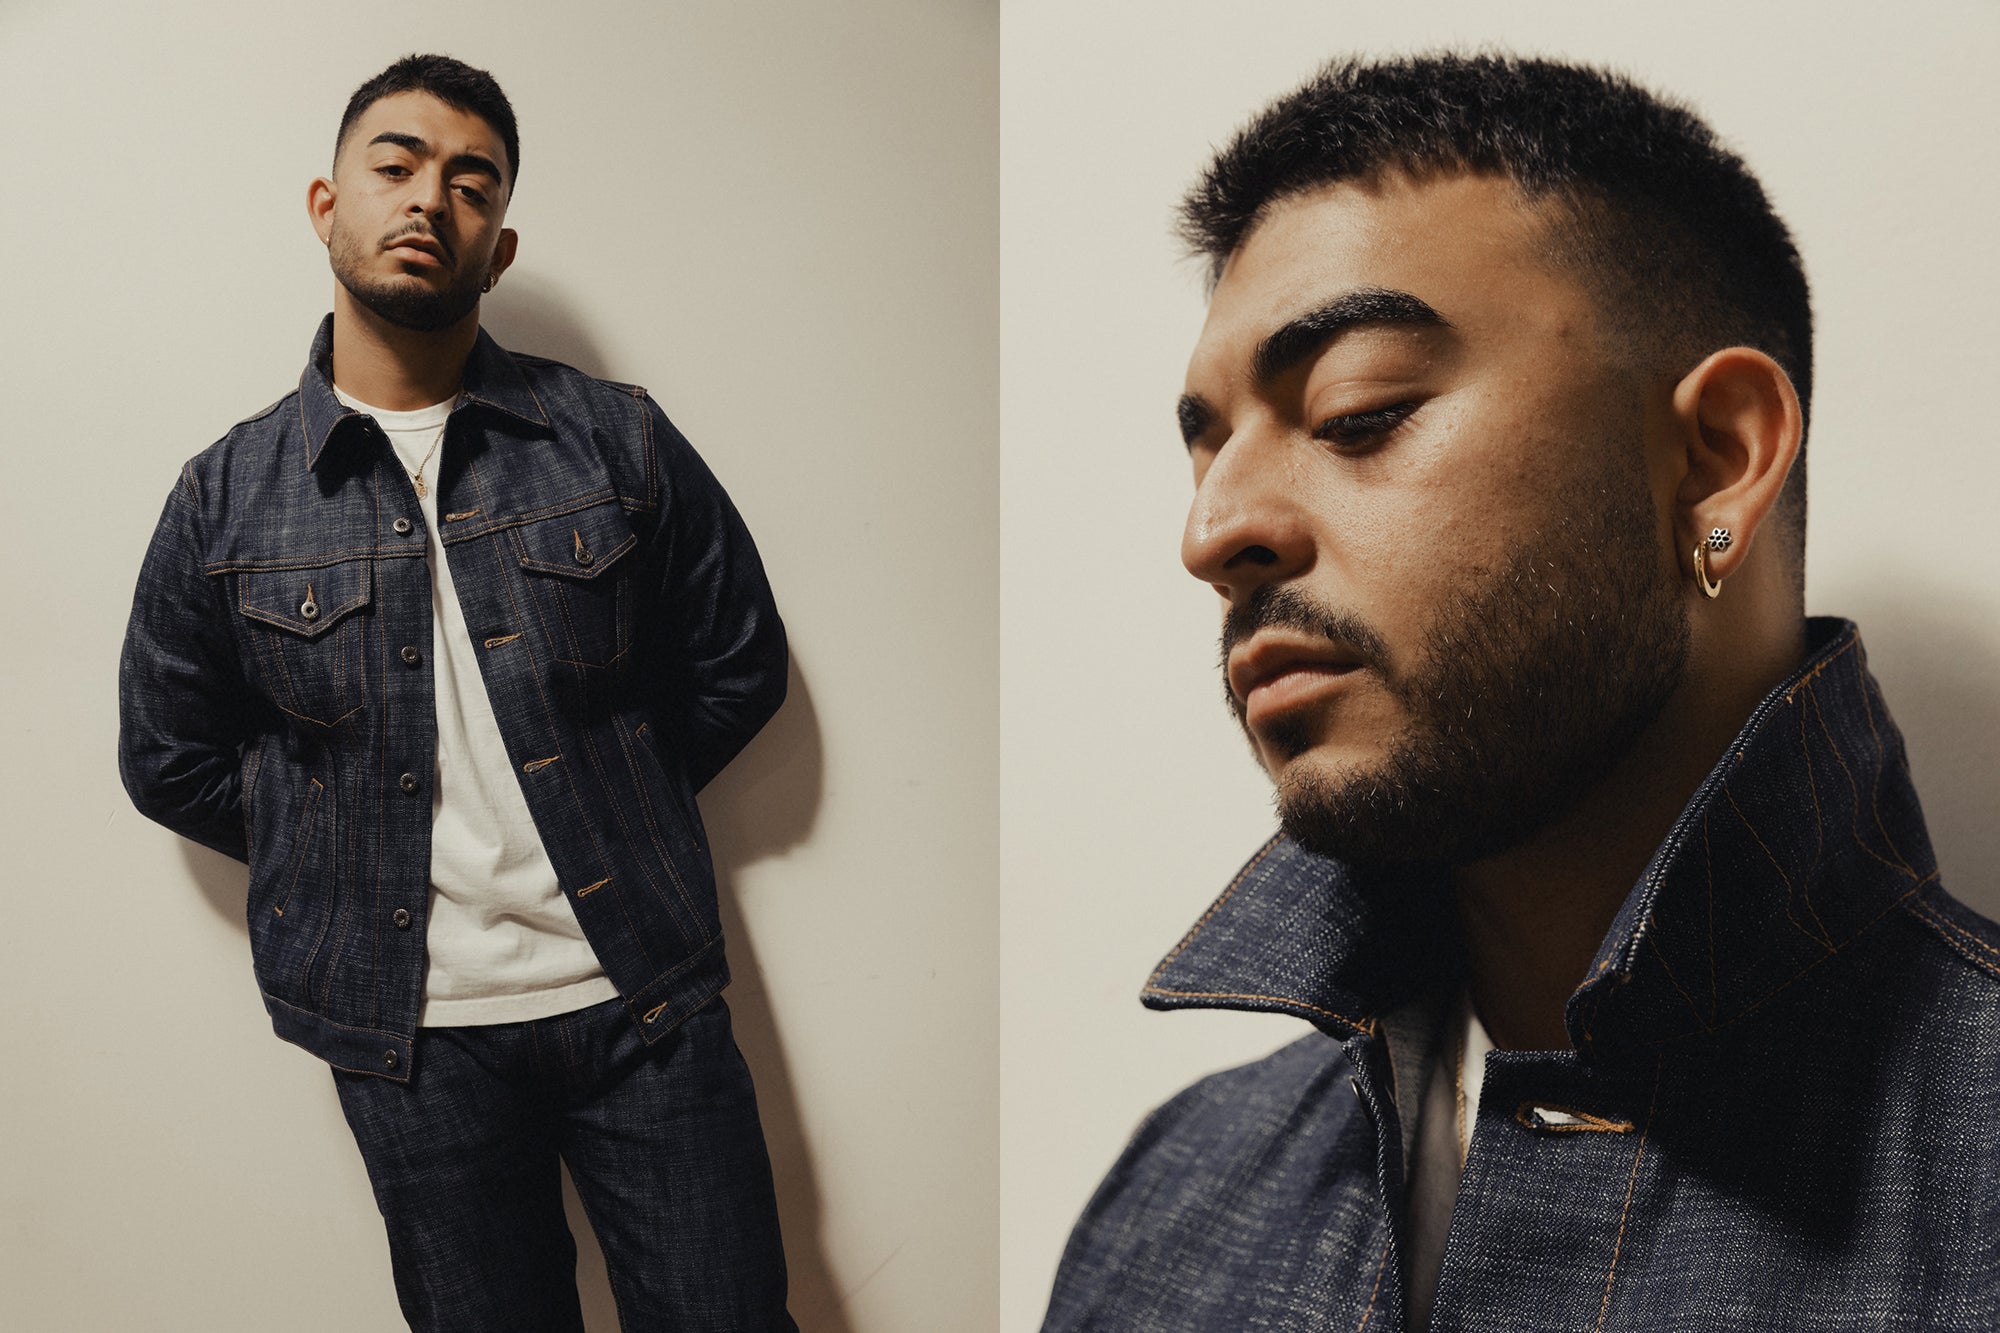 A diptych of a man in a denim jacket against a beige wall.